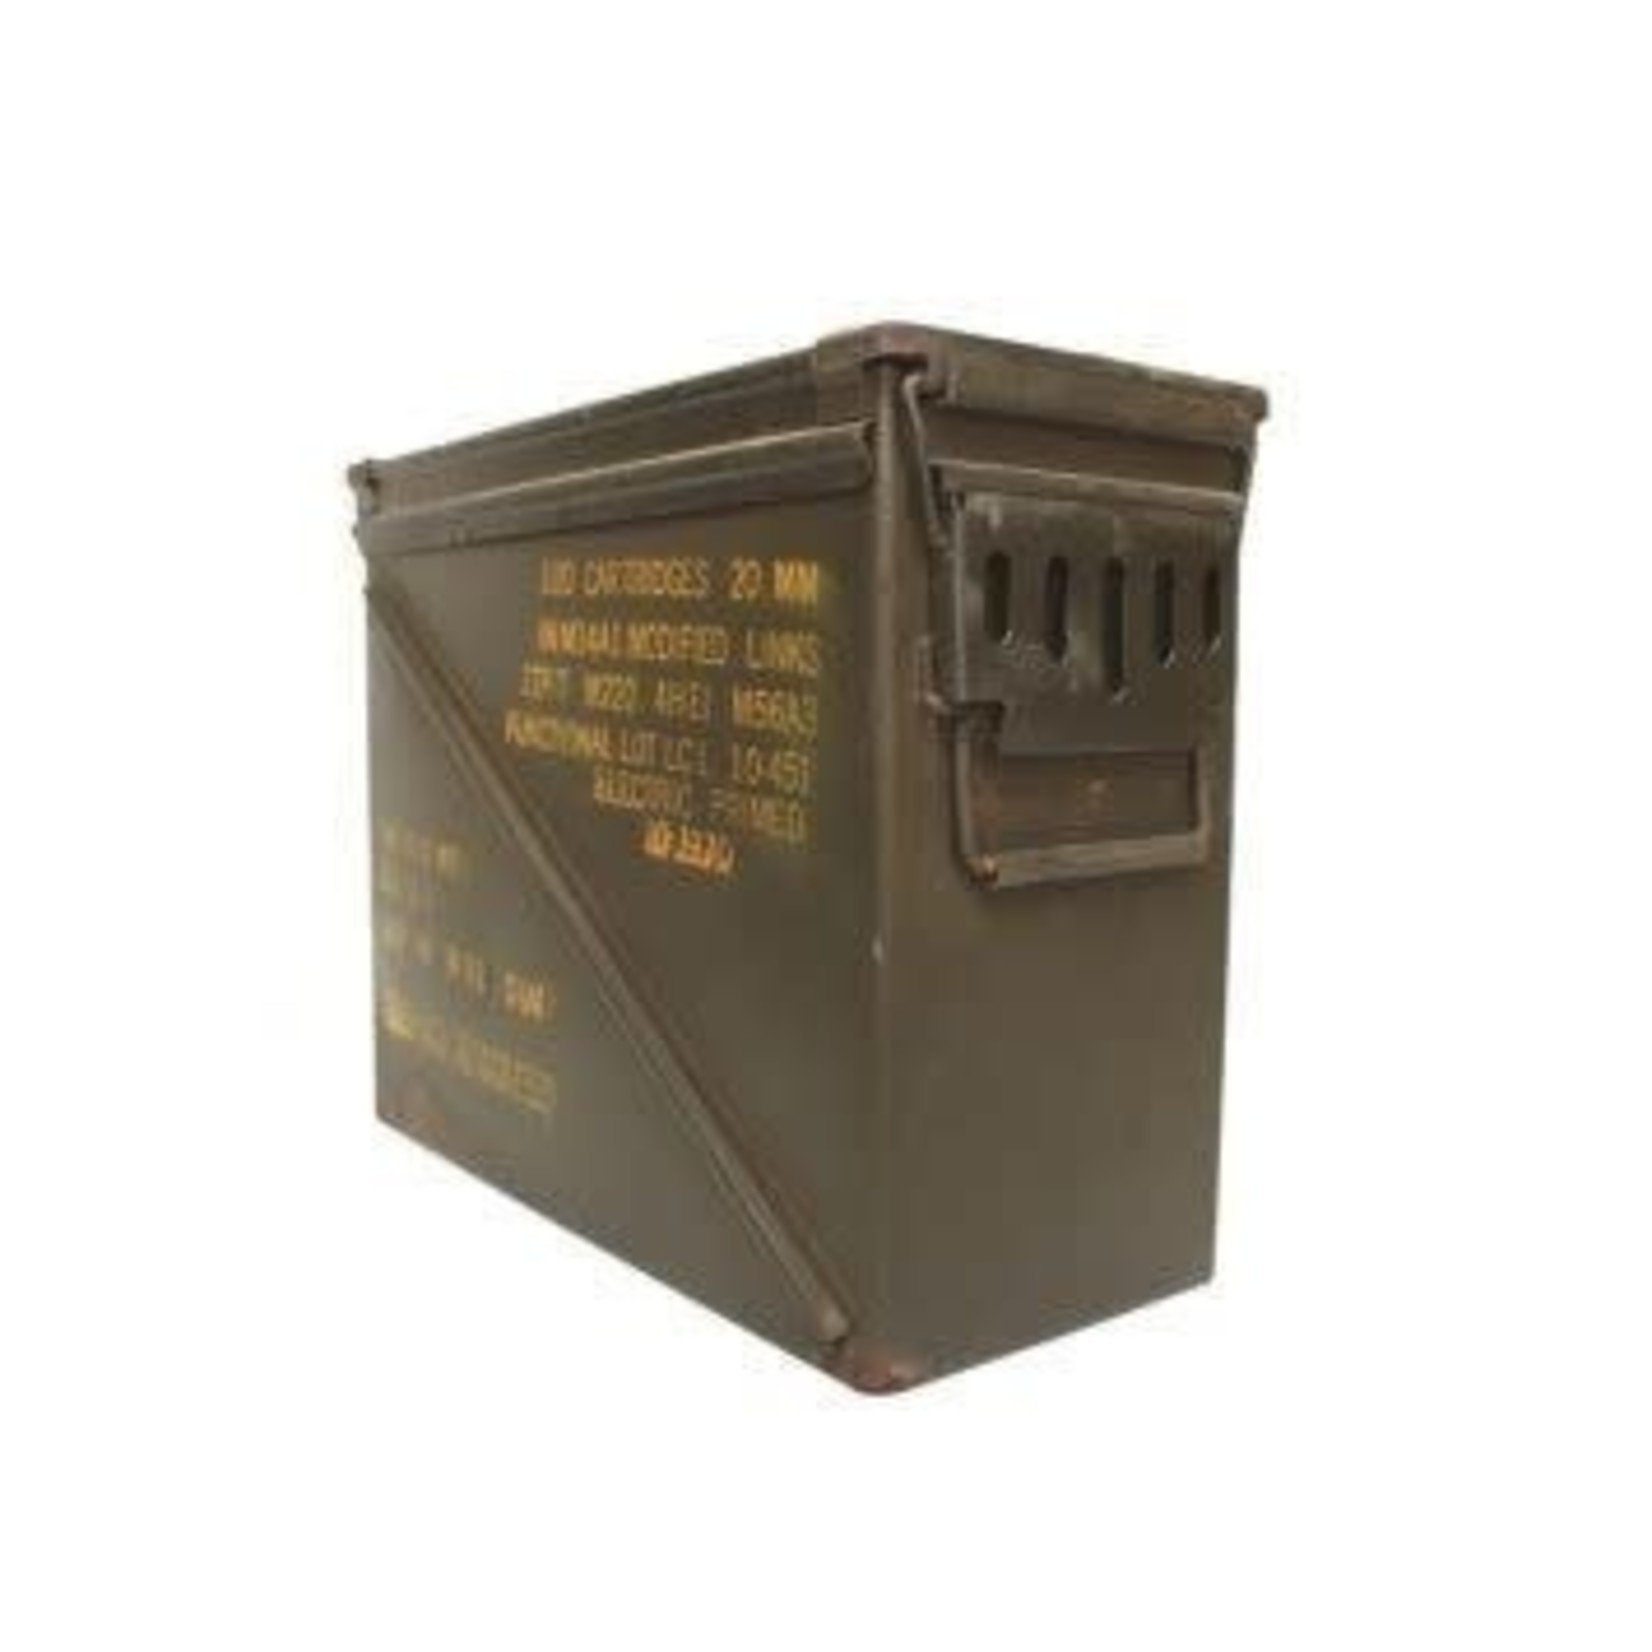 Military Surplus Rocket Box Ammo Can 20mm (822001) - Adventure Outdoors